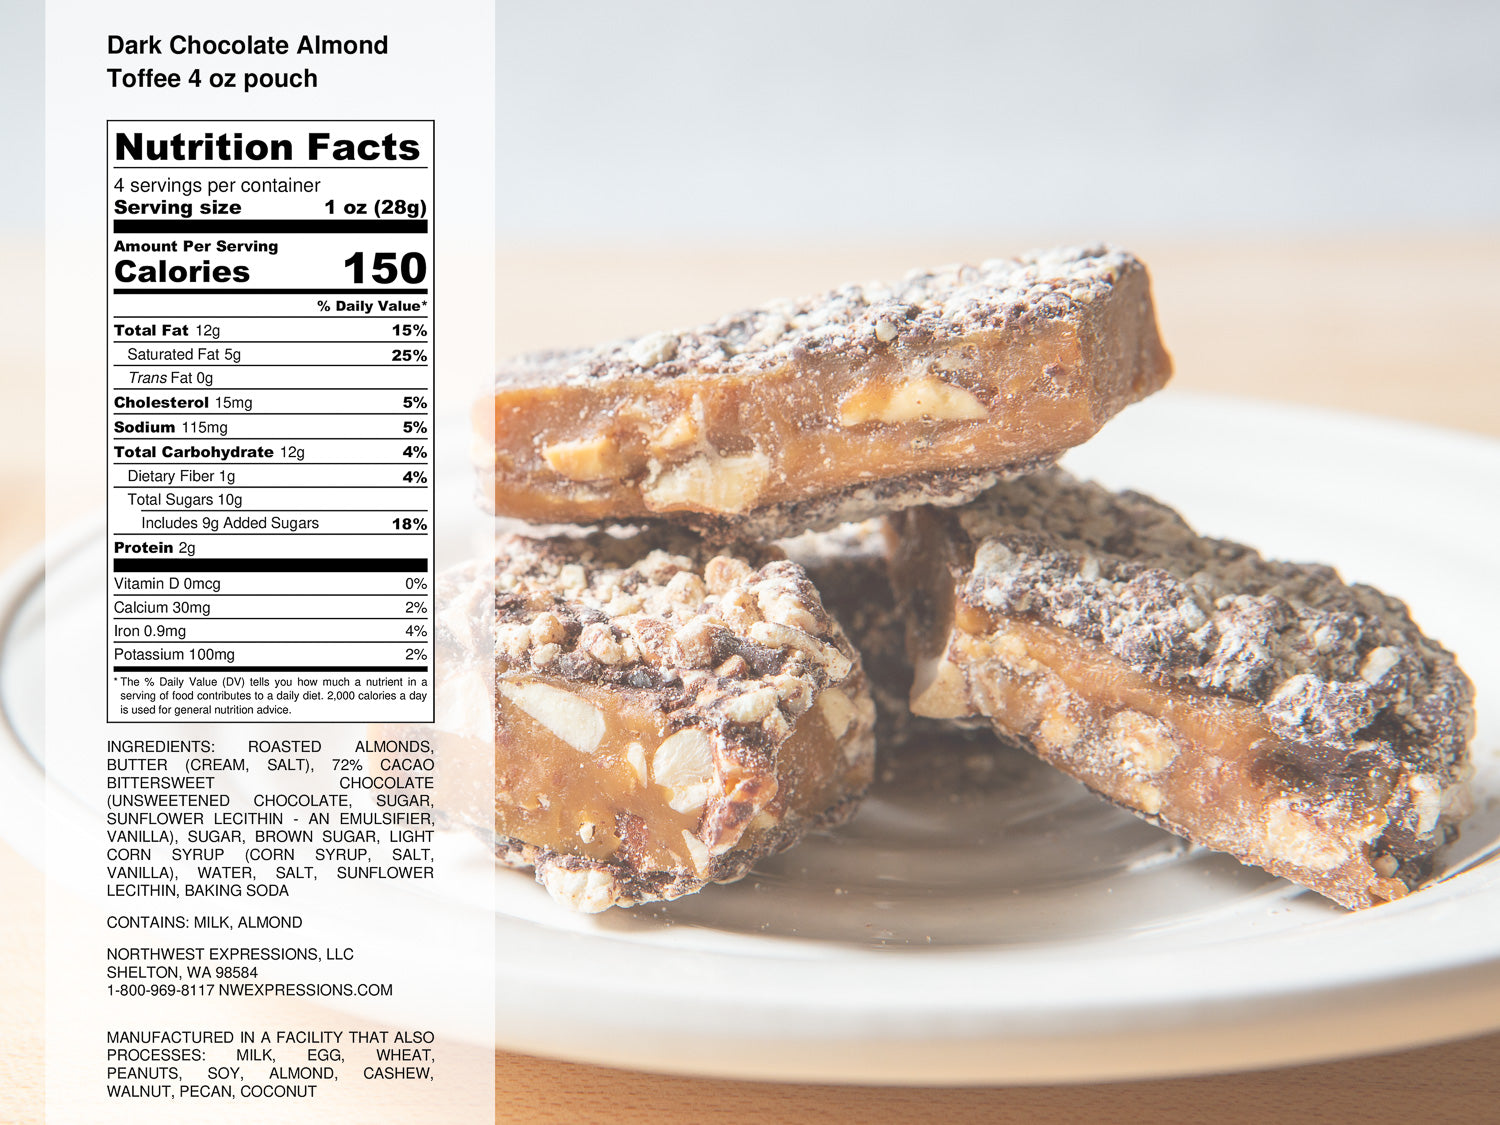 nutritional facts panel for dark chocolate covered toffee